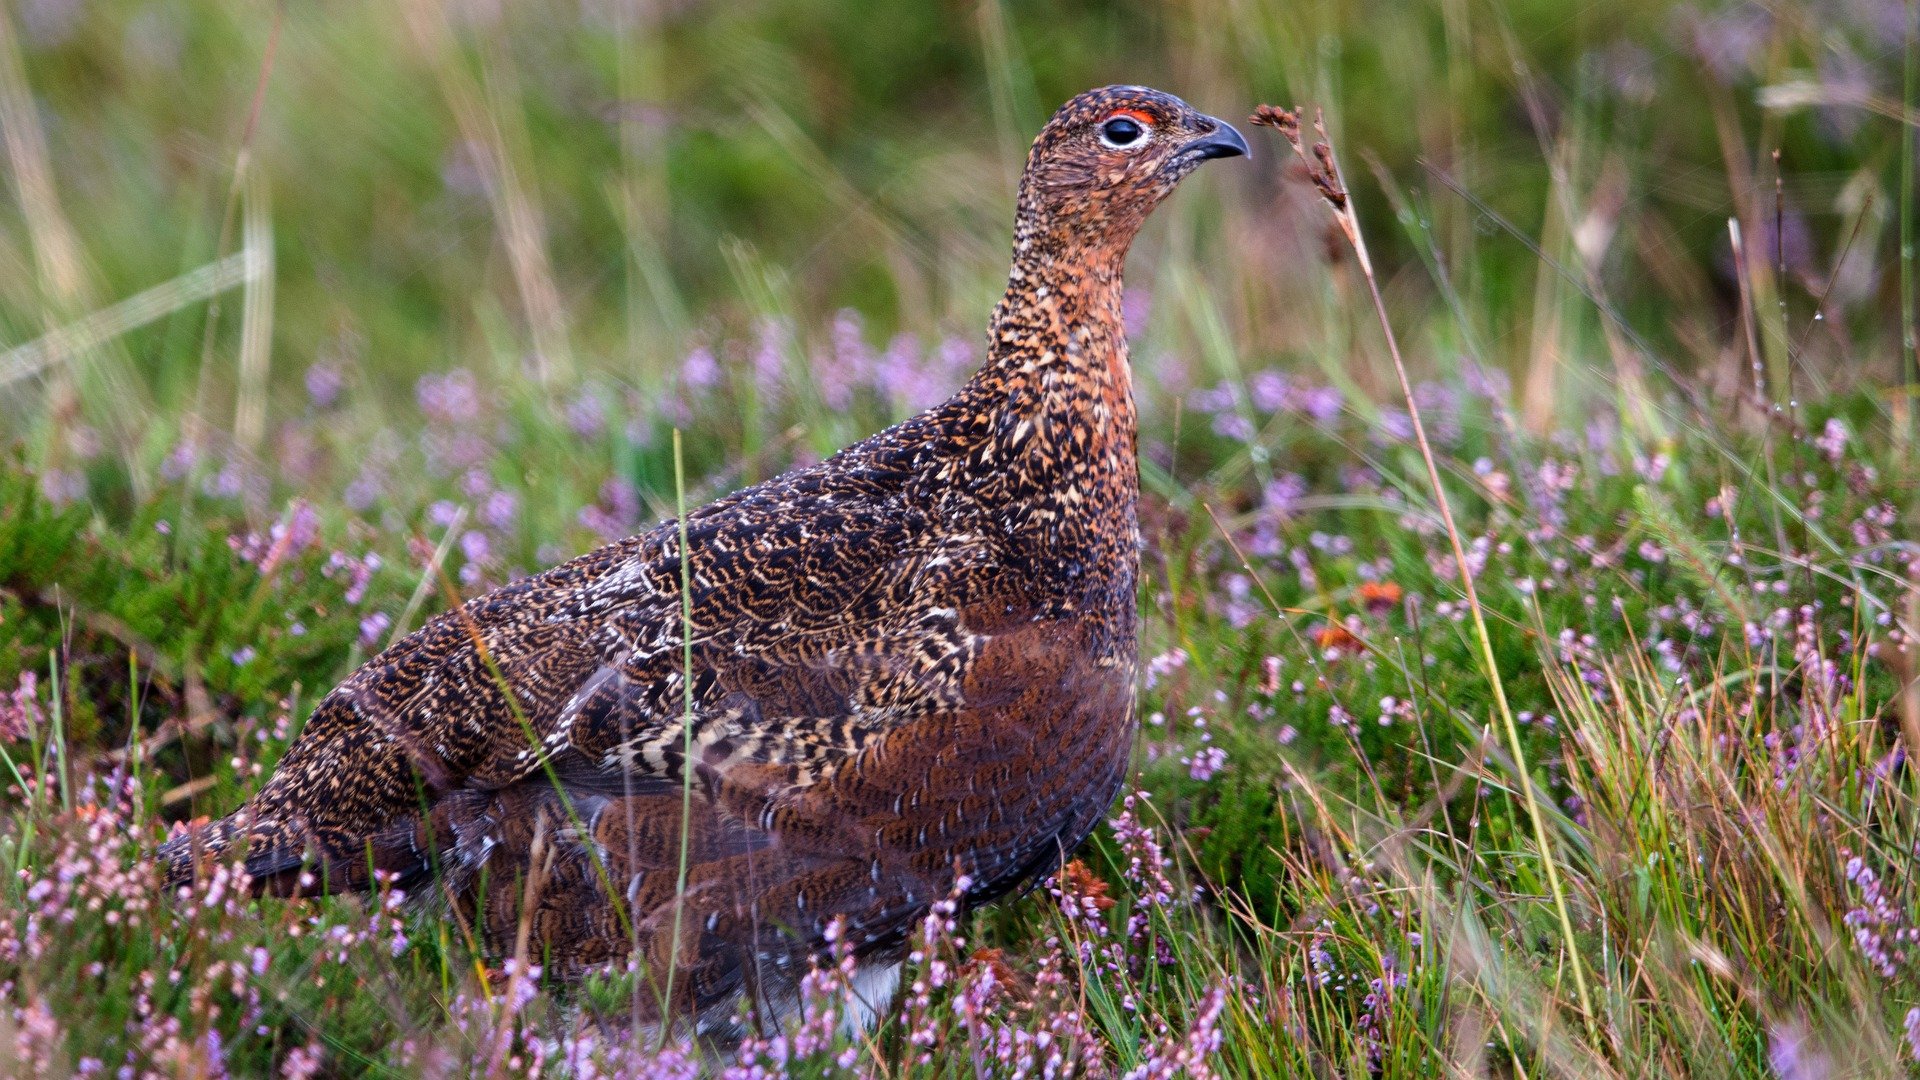 Image of a red grouse sitting in heather.